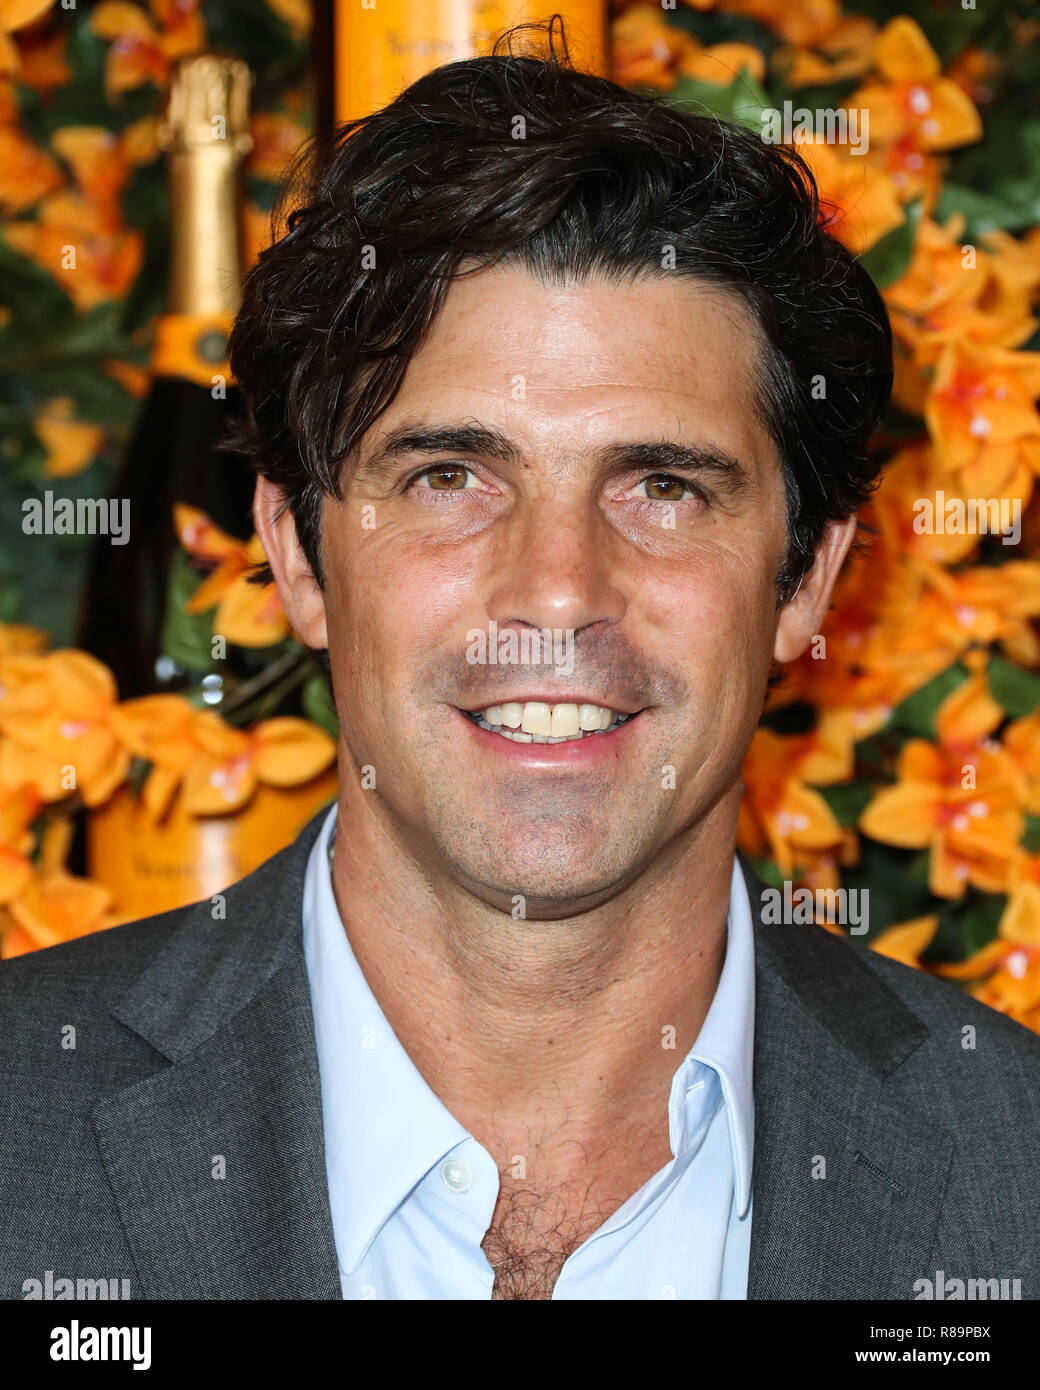 PACIFIC PALISADES, LOS ANGELES, CA, USA - OCTOBER 06: Nacho Figueras at the 9th Annual Veuve Clicquot Polo Classic Los Angeles held at Will Rogers State Historic Park on October 6, 2018 in Pacific Palisades, Los Angeles, California, United States. (Photo by Xavier Collin/Image Press Agency) Stock Photo